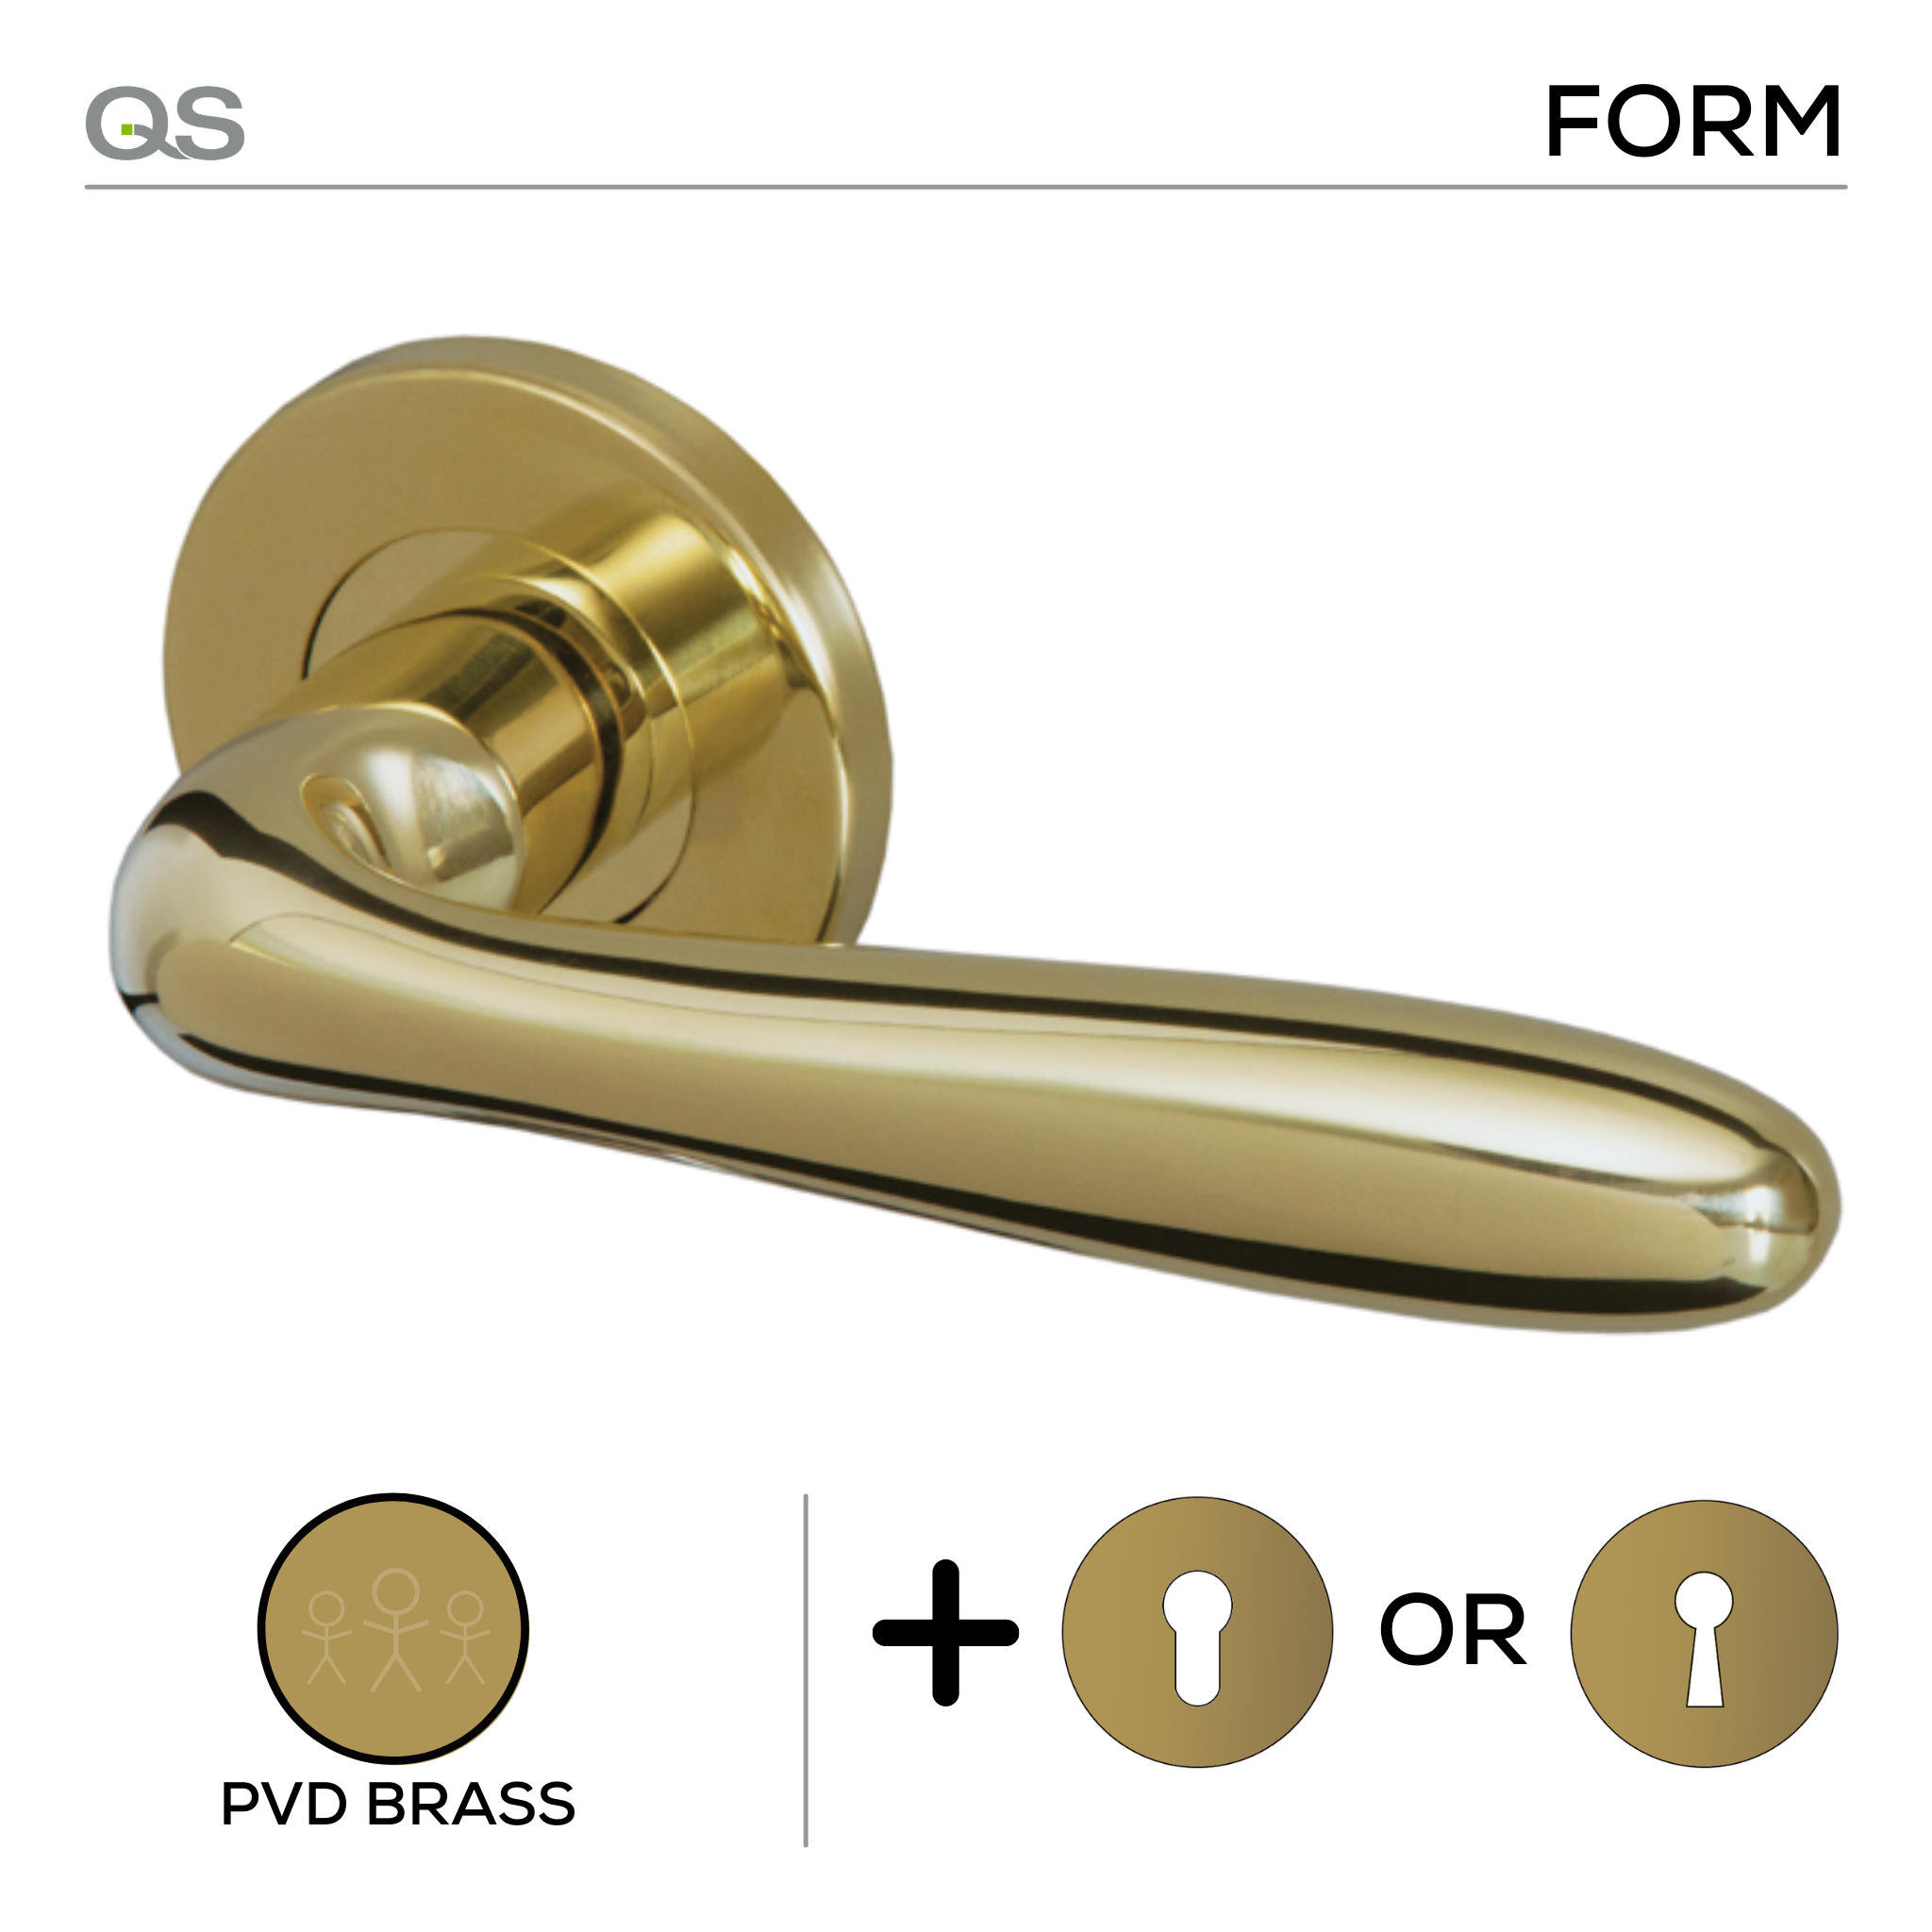 Lamu Form PVD, Lever Handles, Form, On Round Rose, With Escutcheons, PVD Brass, QS